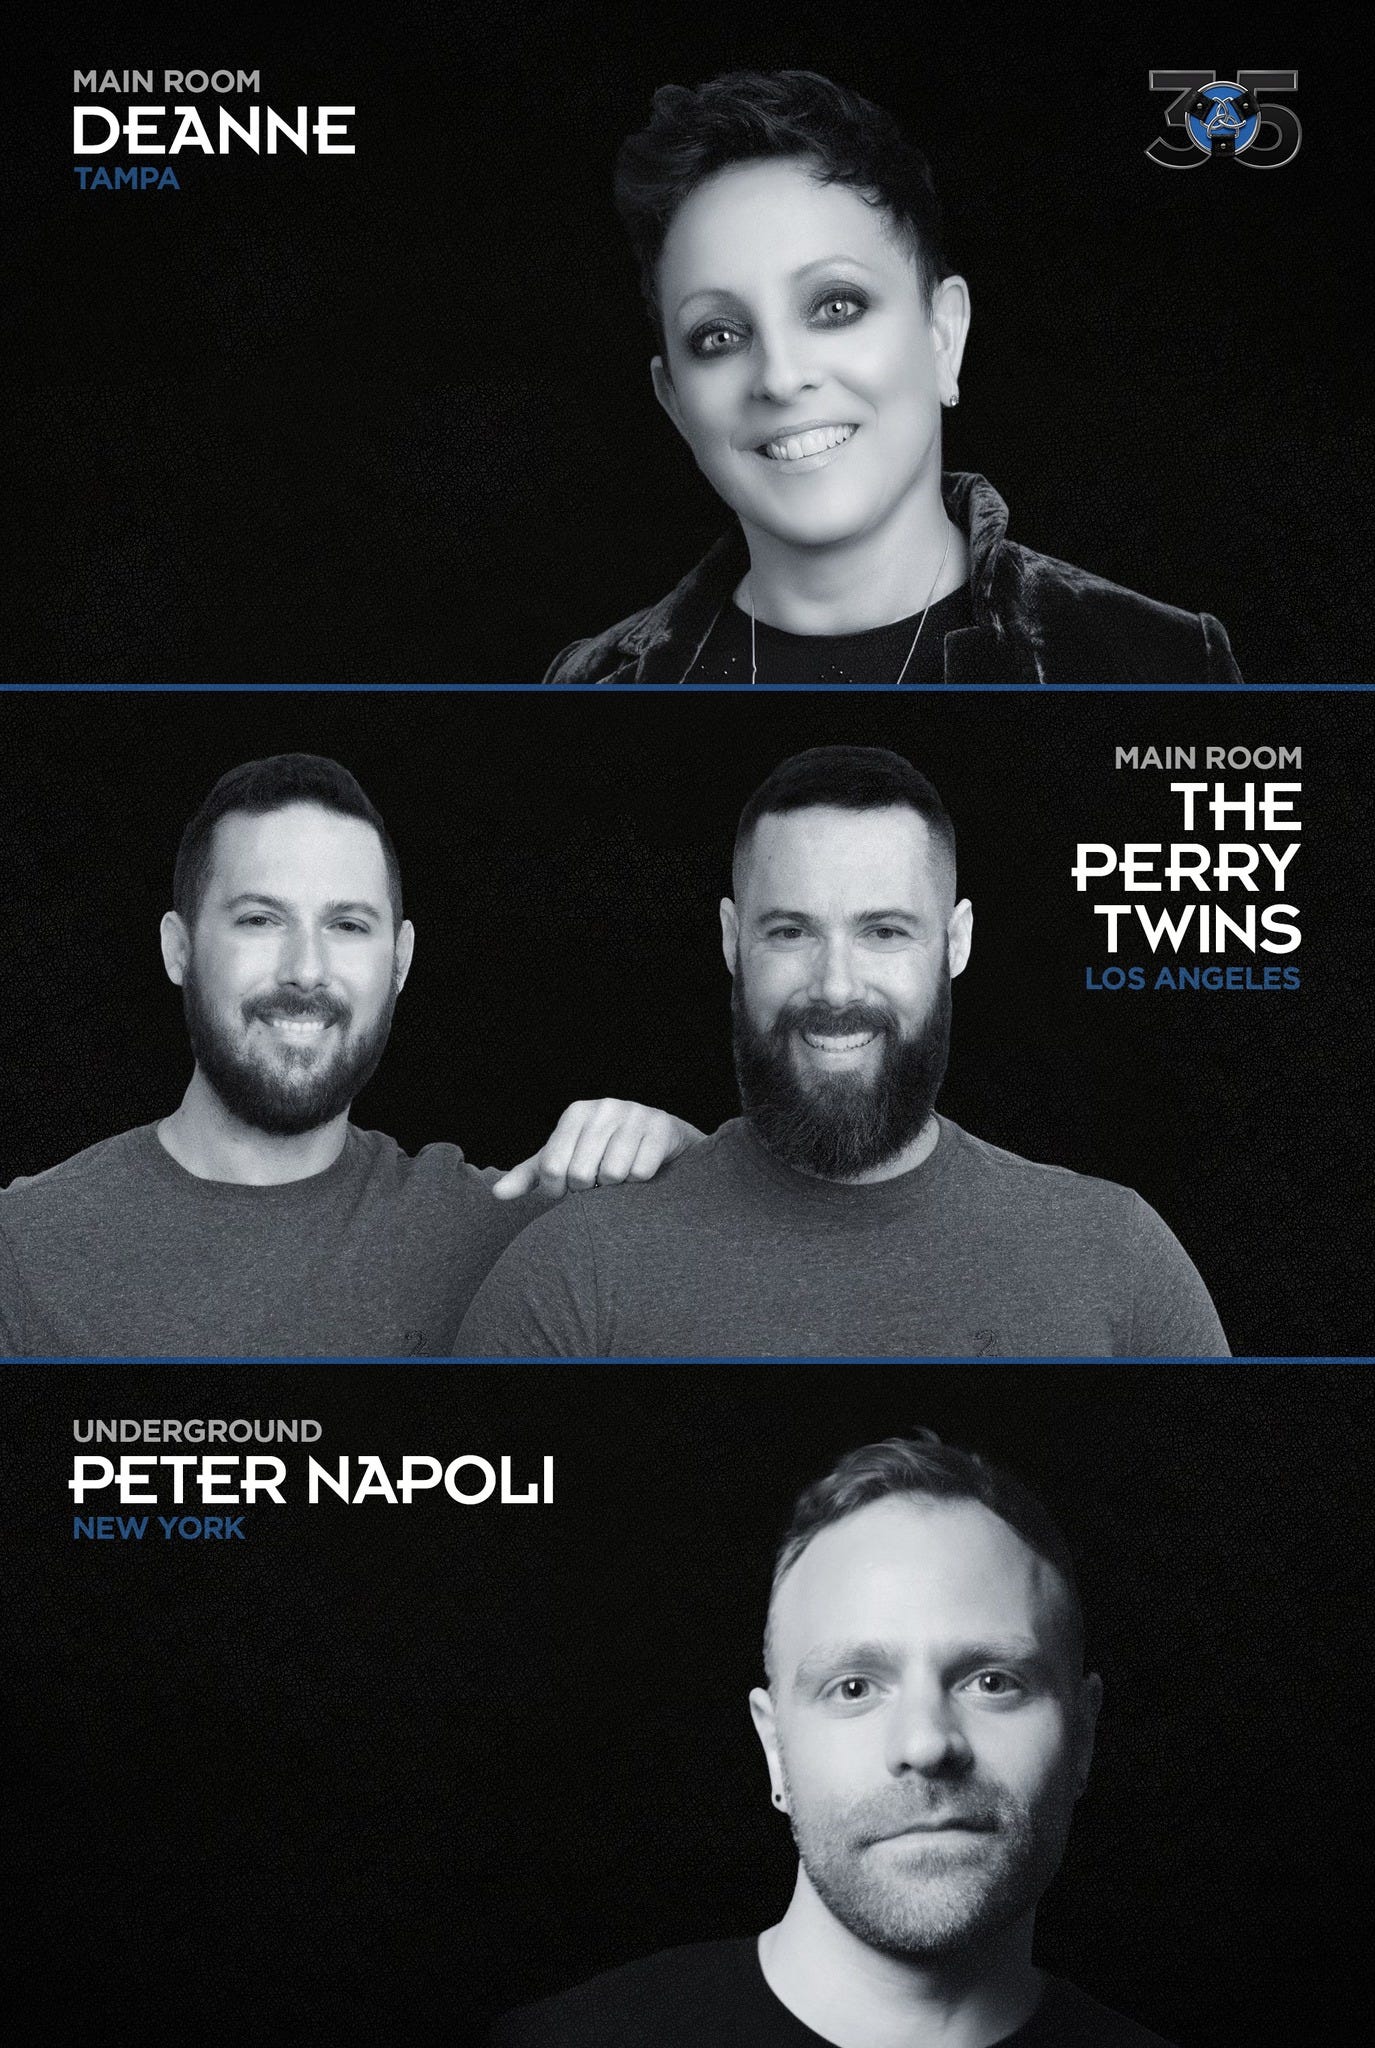 May be an image of 4 people, beard and text that says 'MAIN ROOM DEANNE MAINROOM MAIN ROOM THE PERRY TWINS LOSANGELES UNDERGROUND PETER NAPOLI'